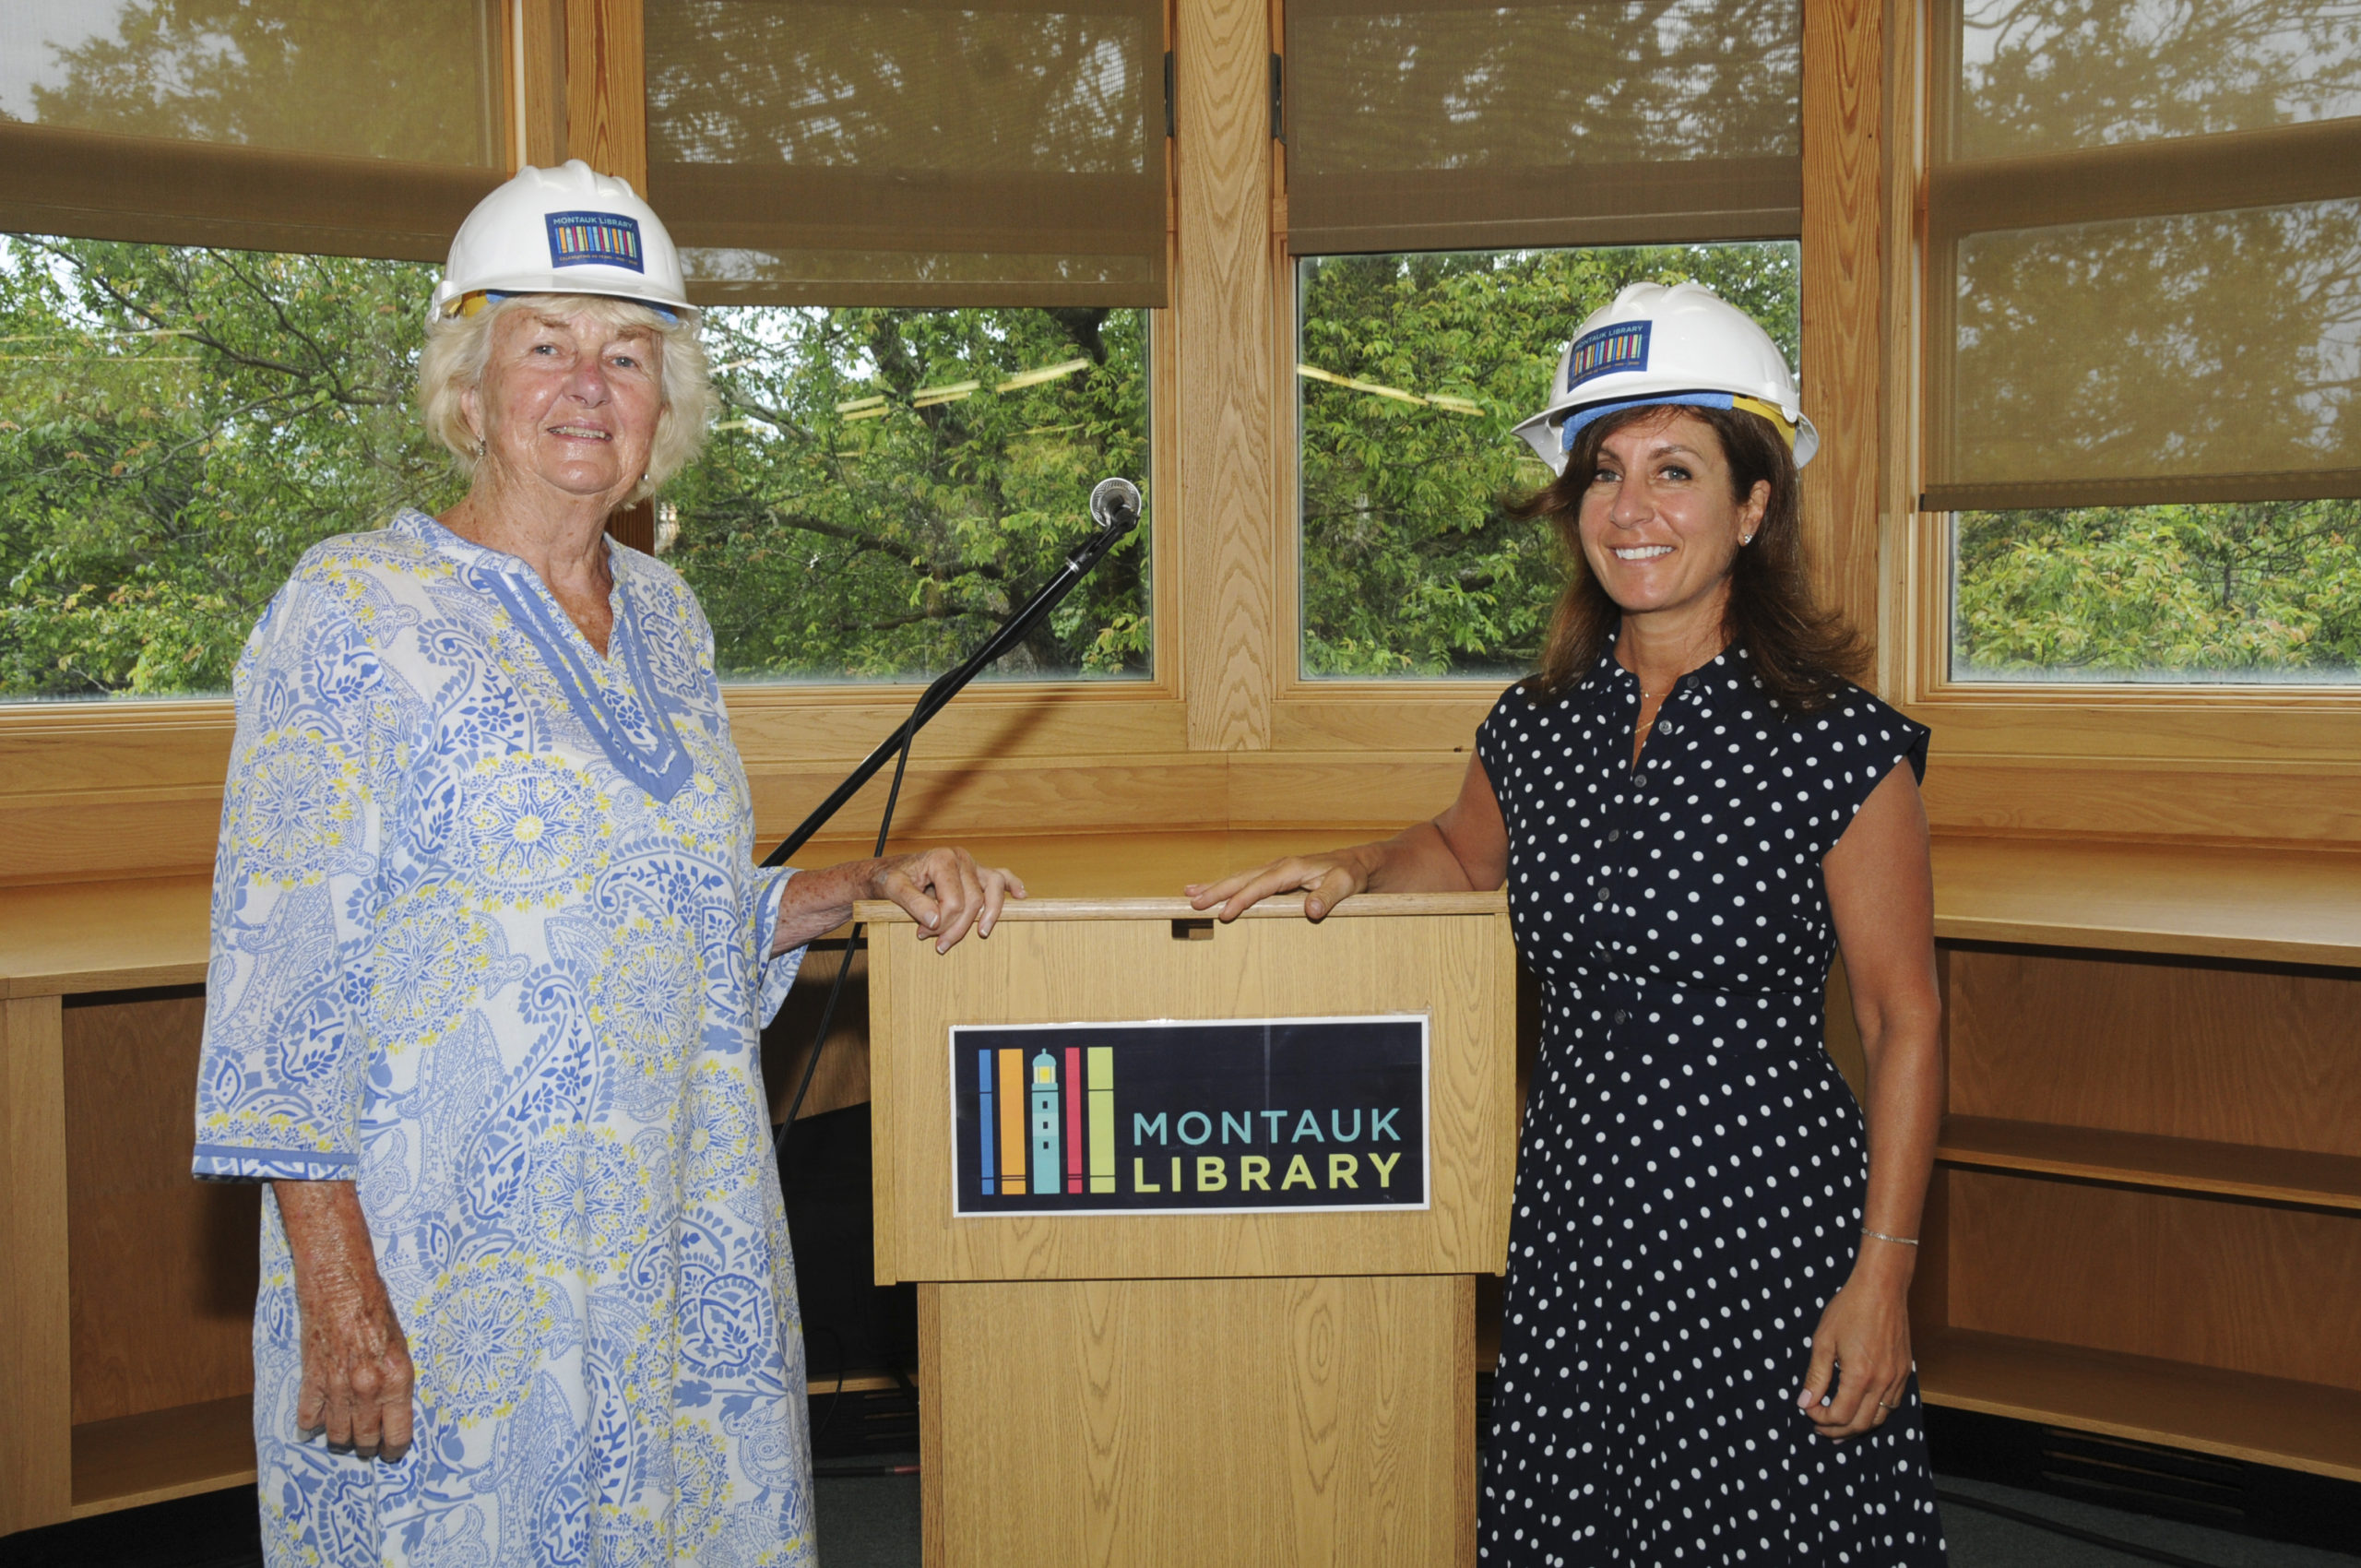 Montauk Library Board President Joan Lycke and Library Director Denise DiPaolo at the Montauk Library expansion and renovation building project groundbreaking ceremony on Friday, July 24. RICHARD LEWIN